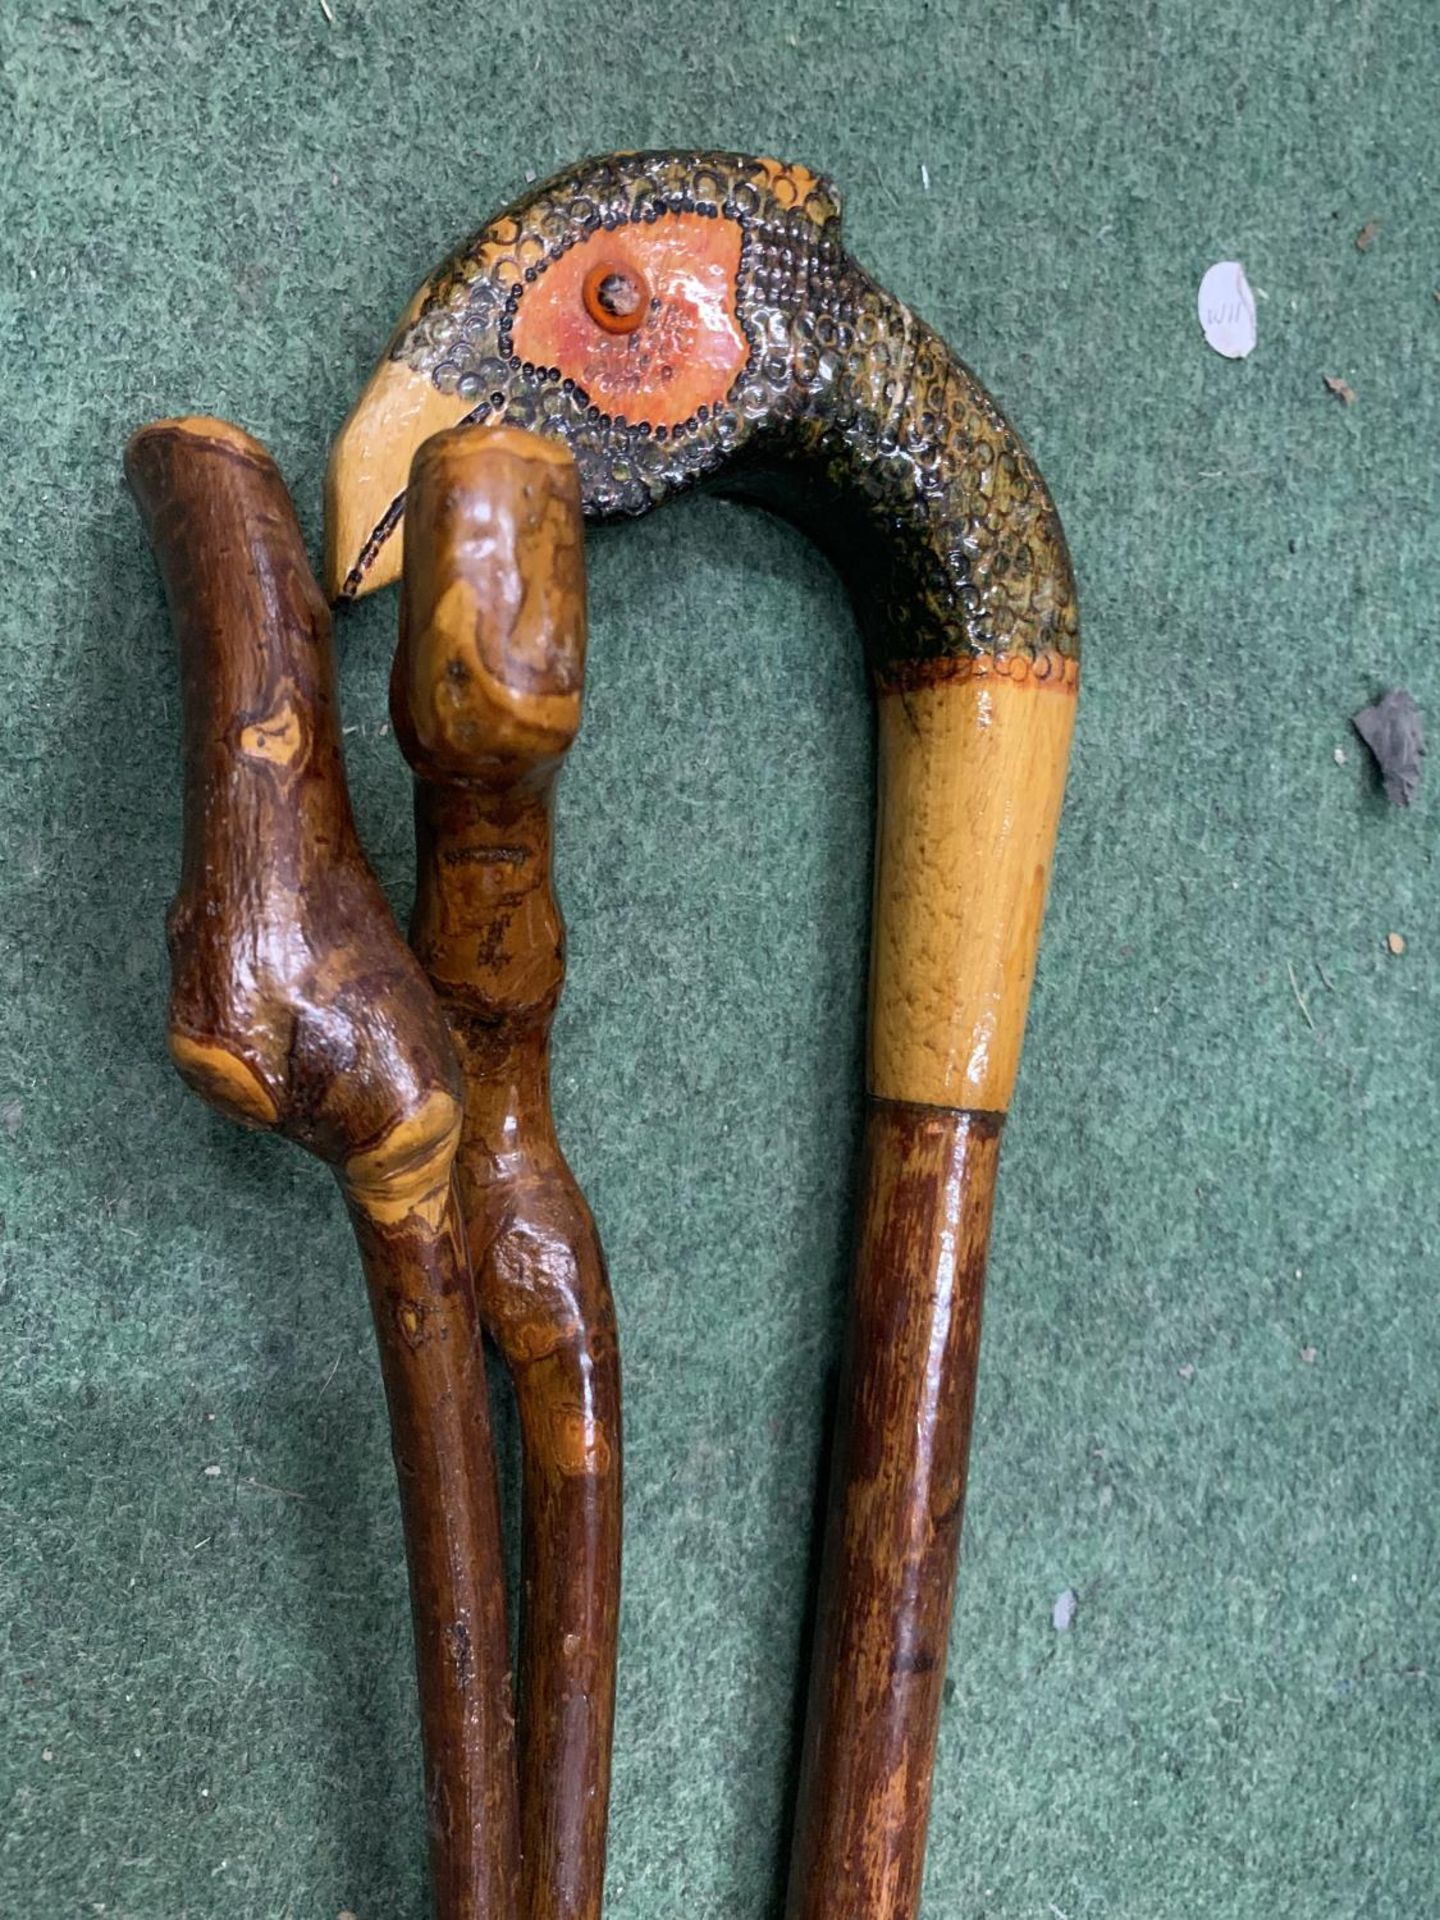 THREE WALKING STICKS, ONE WITH A BIRDS HEAD HANDLE - Image 3 of 3